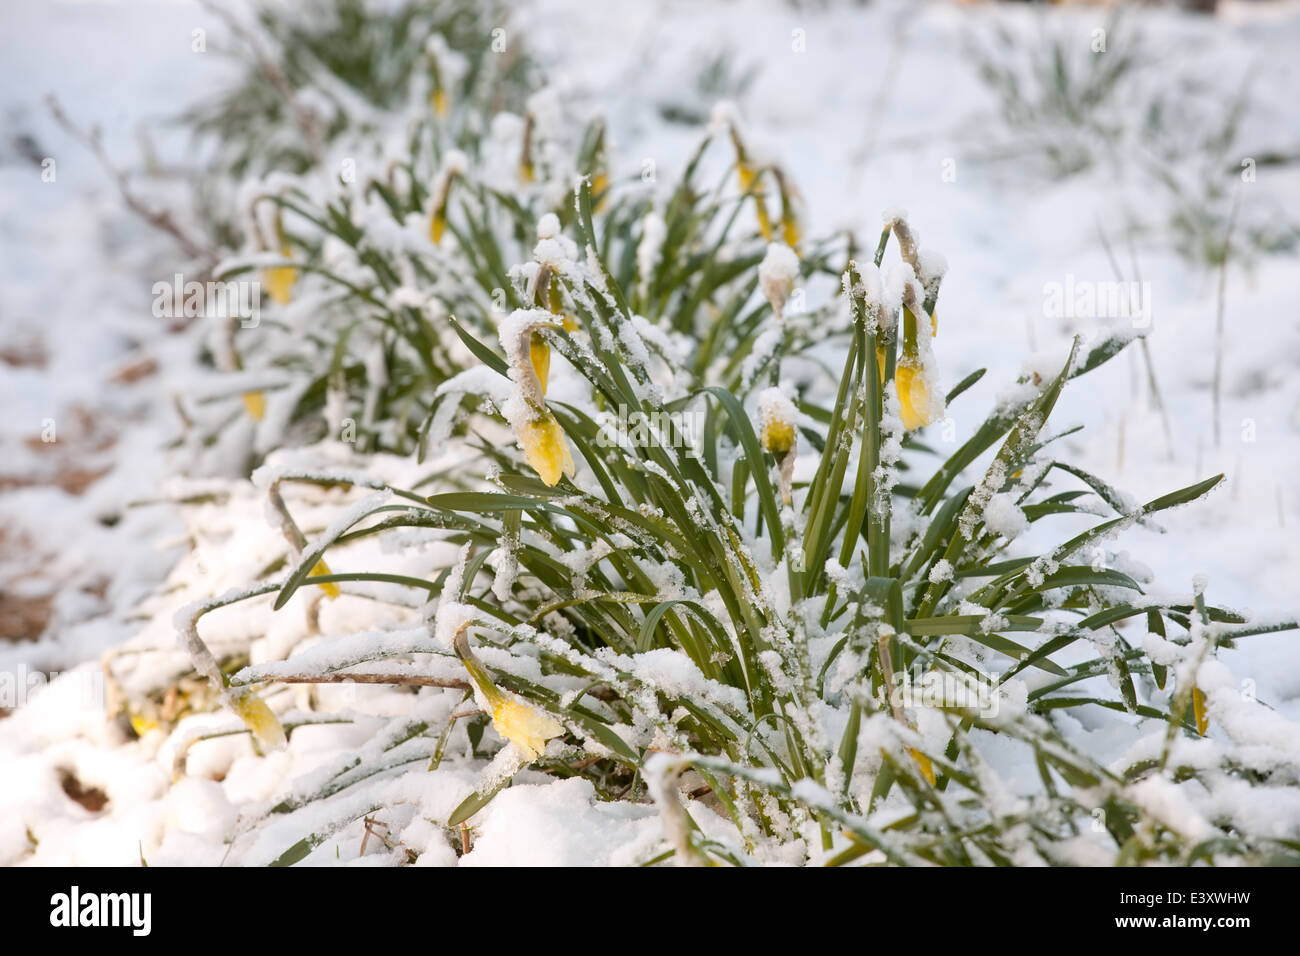 narcissus flowers under sudden snow closeup on outdoor background Stock Photo